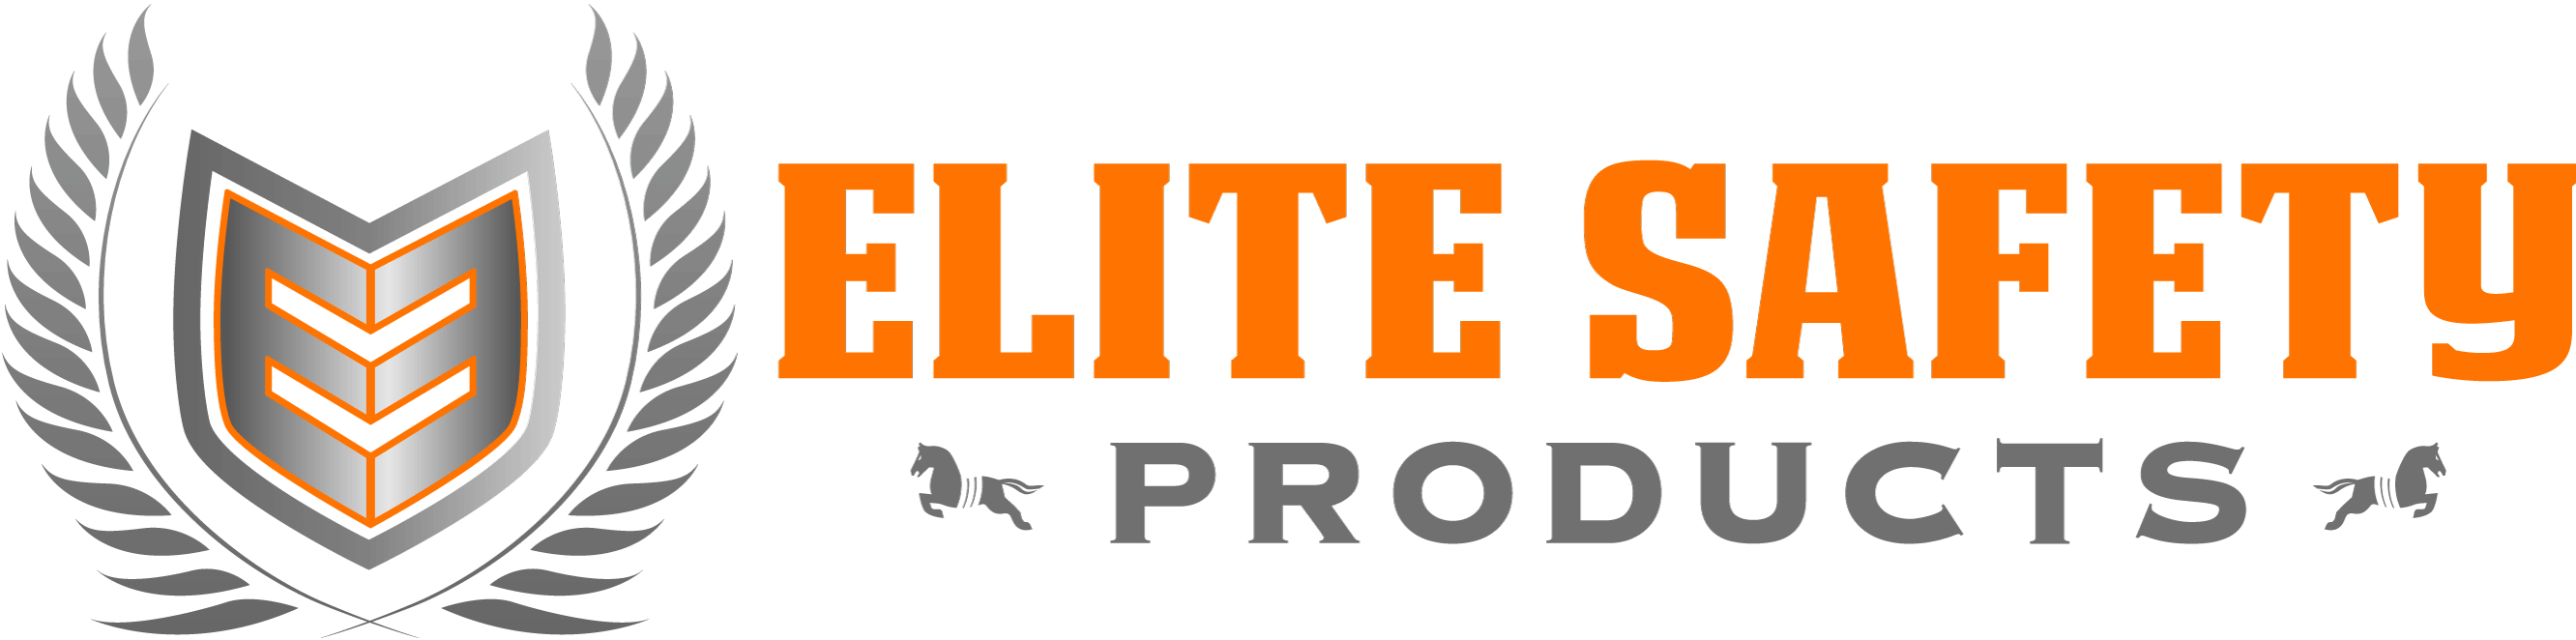 Elite Safety Products